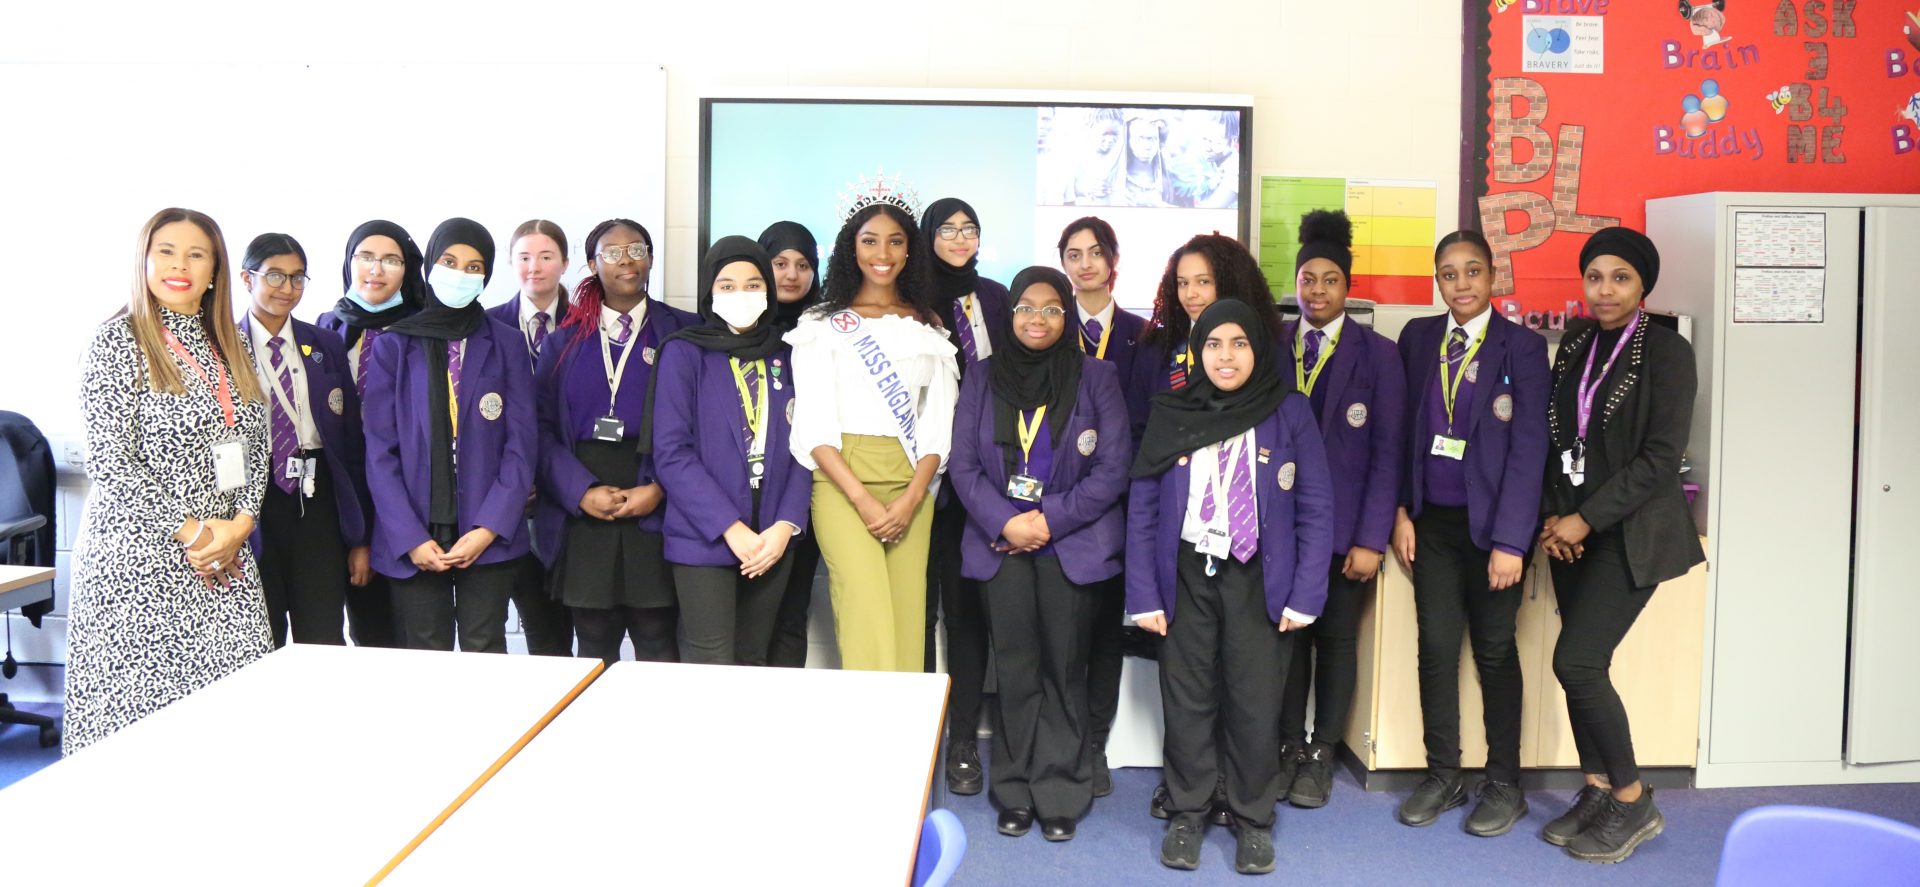 Miss England Visits Whalley Range School for important discussion with students